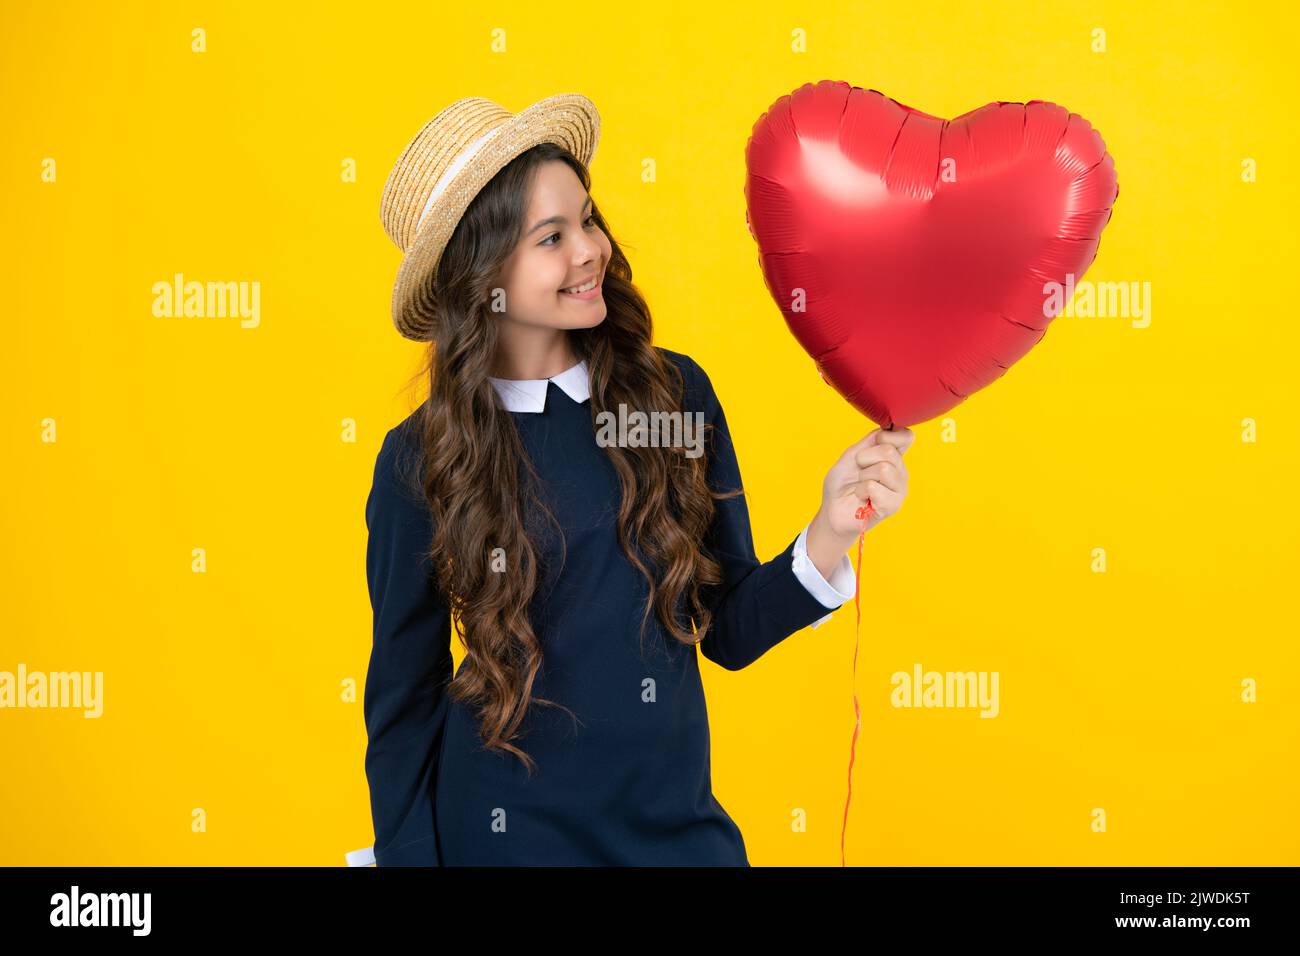 Cheerful lovely romantic teen girl hold red heart balloon, symbol of love for valentines day isolated on yellow background. Stock Photo